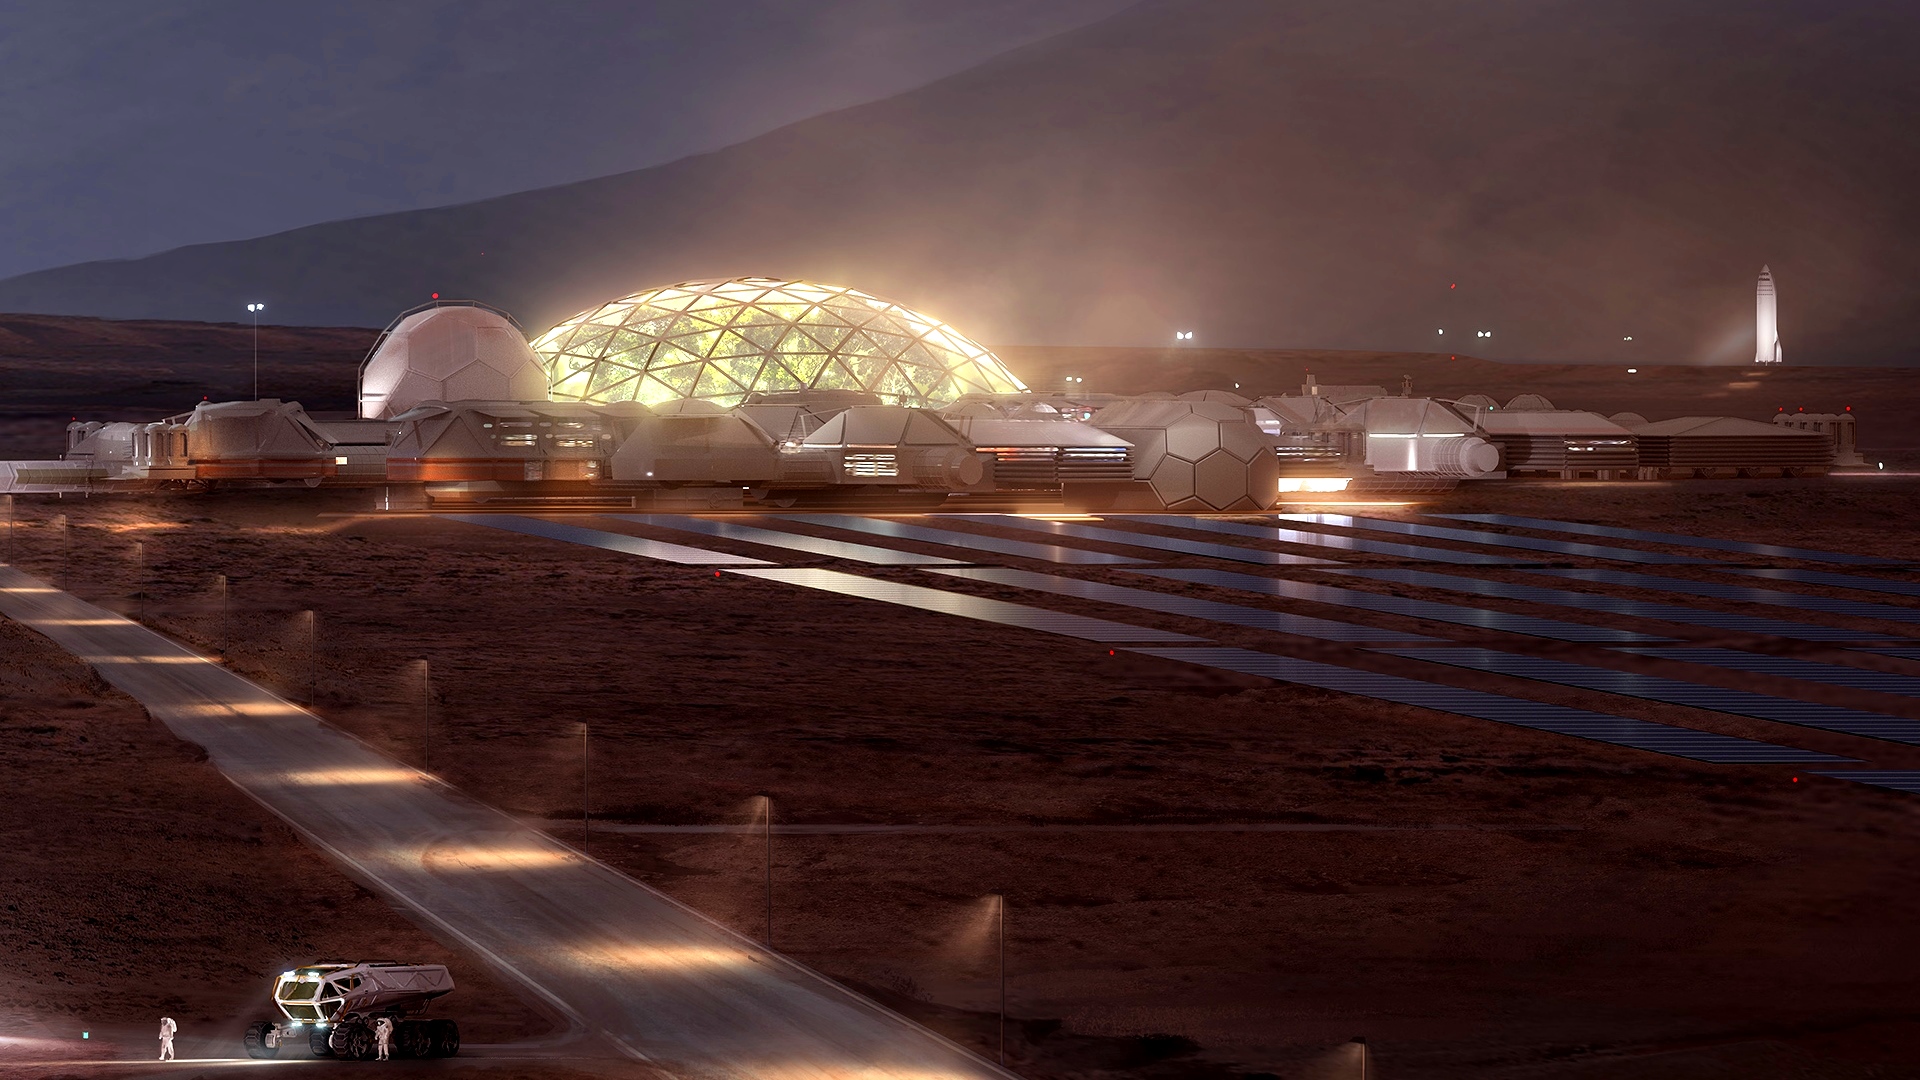 A Mars base with a domed biosphere in the background and several launch pads with Starships on them